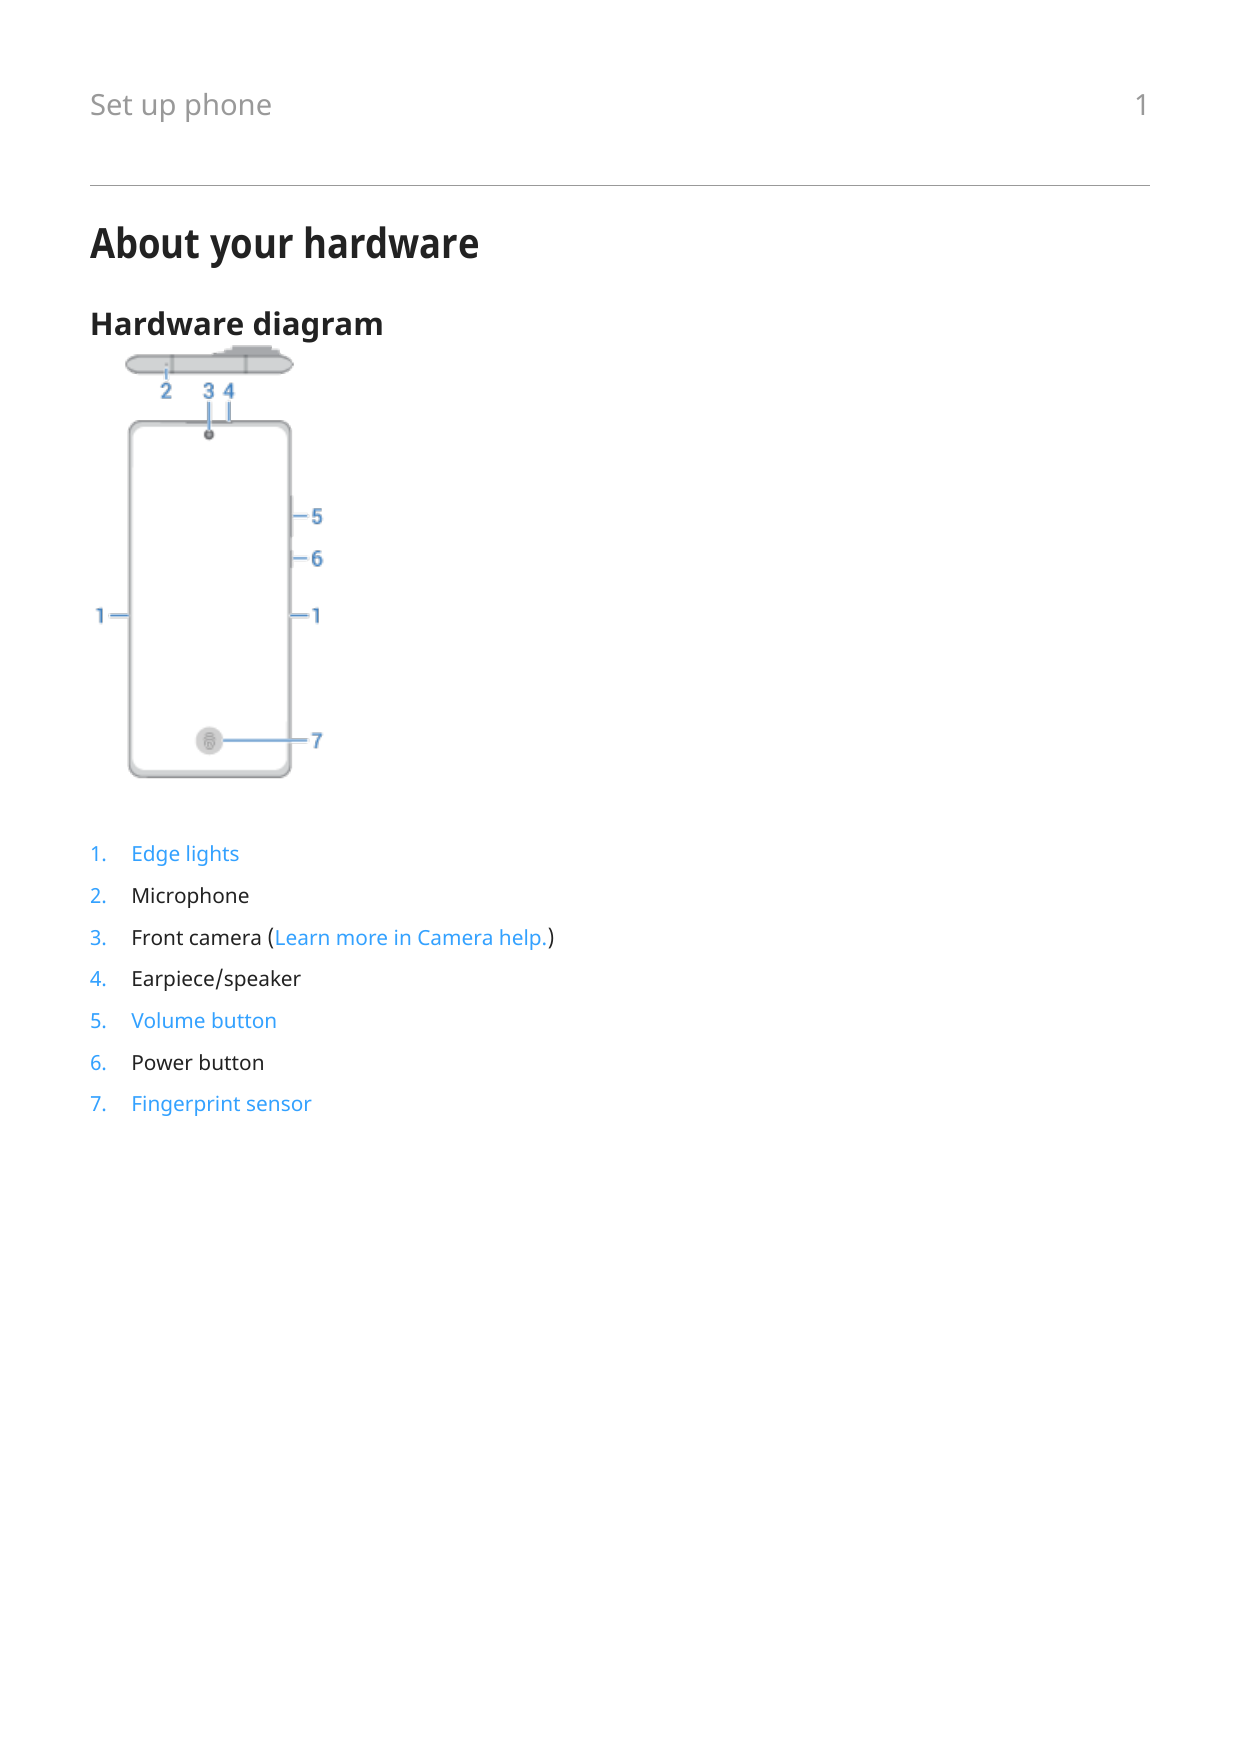 Set up phoneAbout your hardwareHardware diagram1.Edge lights2.Microphone3.Front camera (Learn more in Camera help.)4.Earpiece/sp